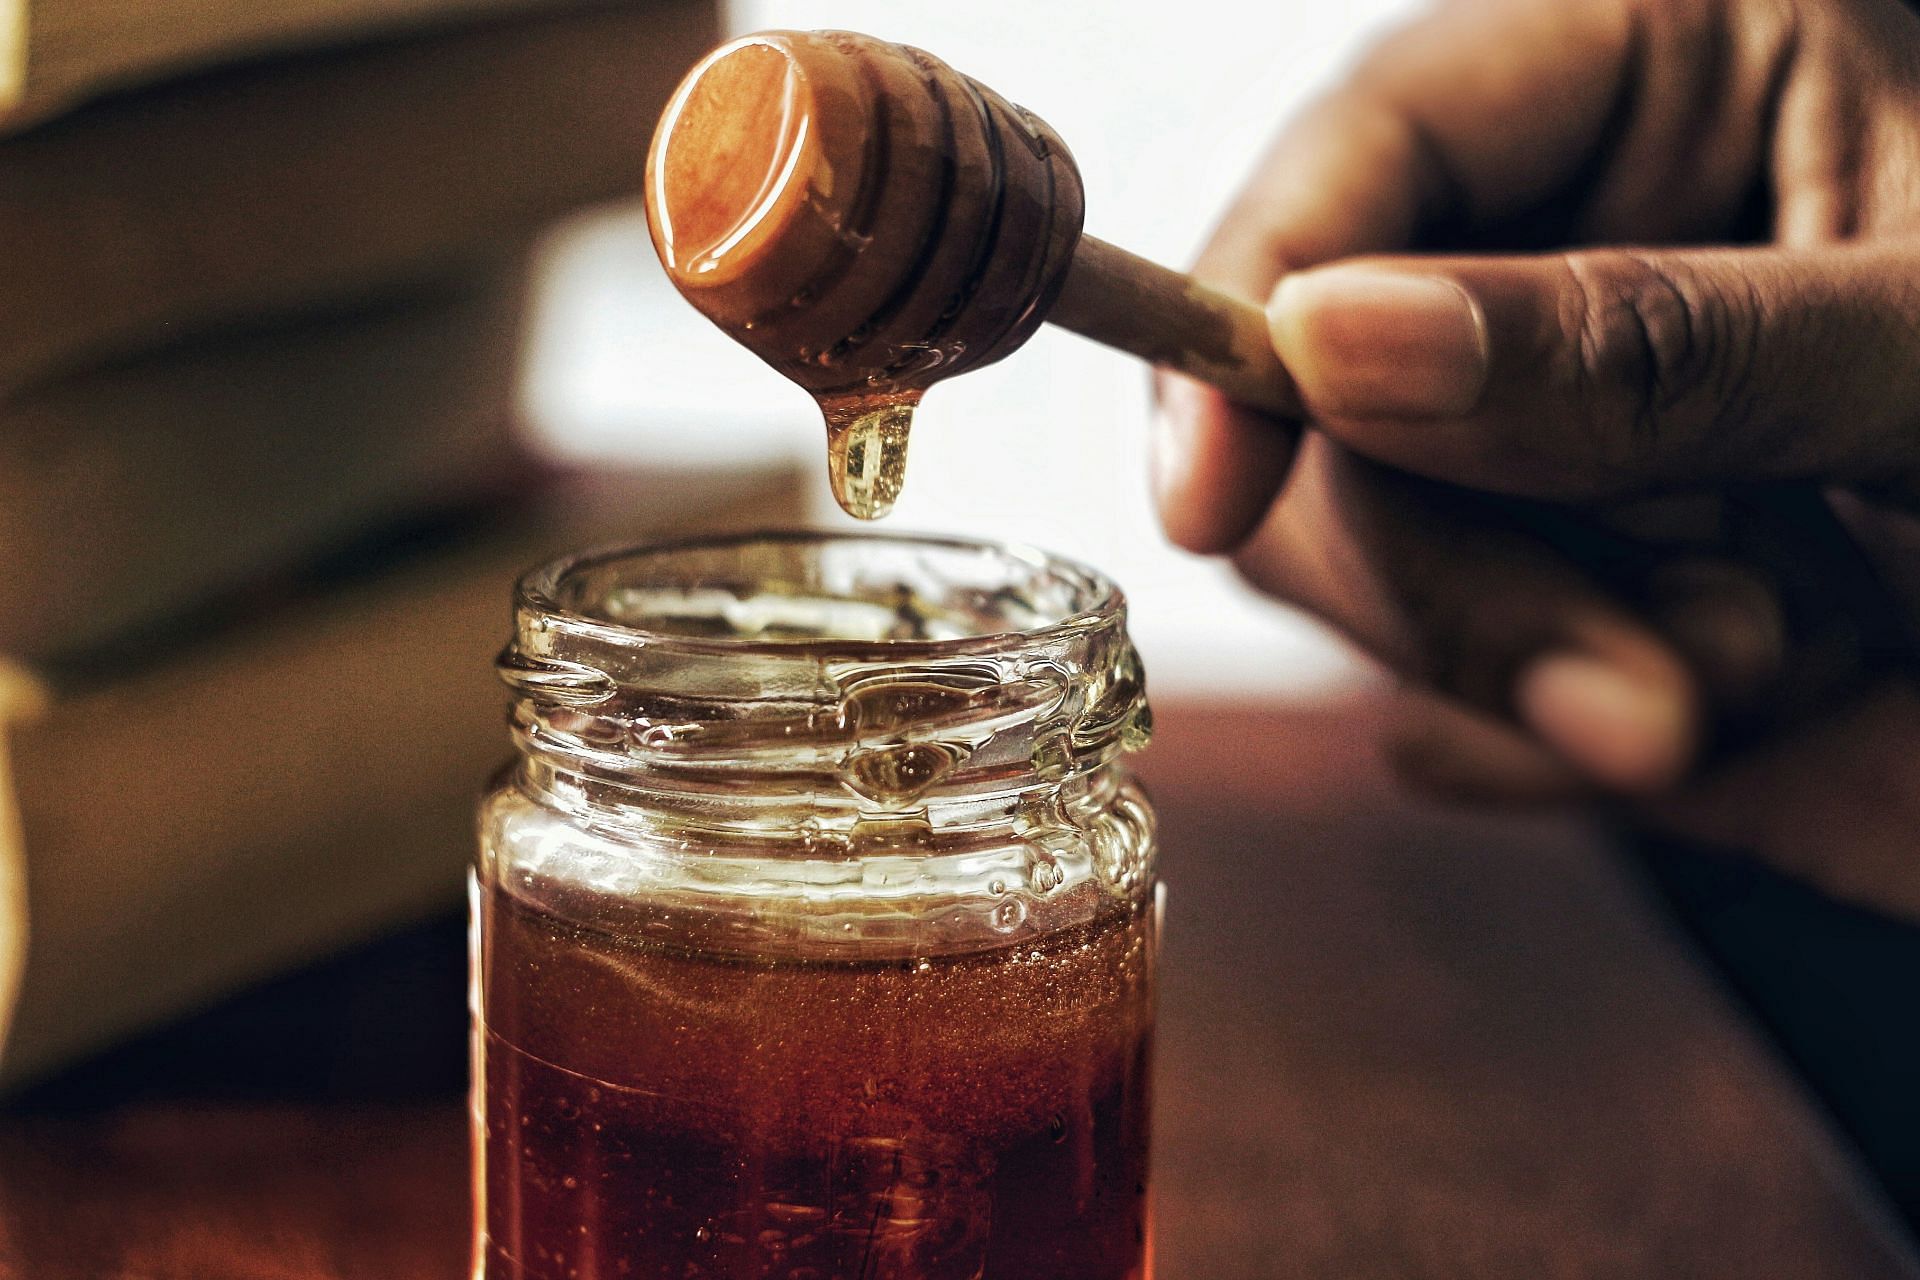 Home remedies for burns: Apply honey on the affected area (Image by Arwin Neil Baichoo/Unsplash)